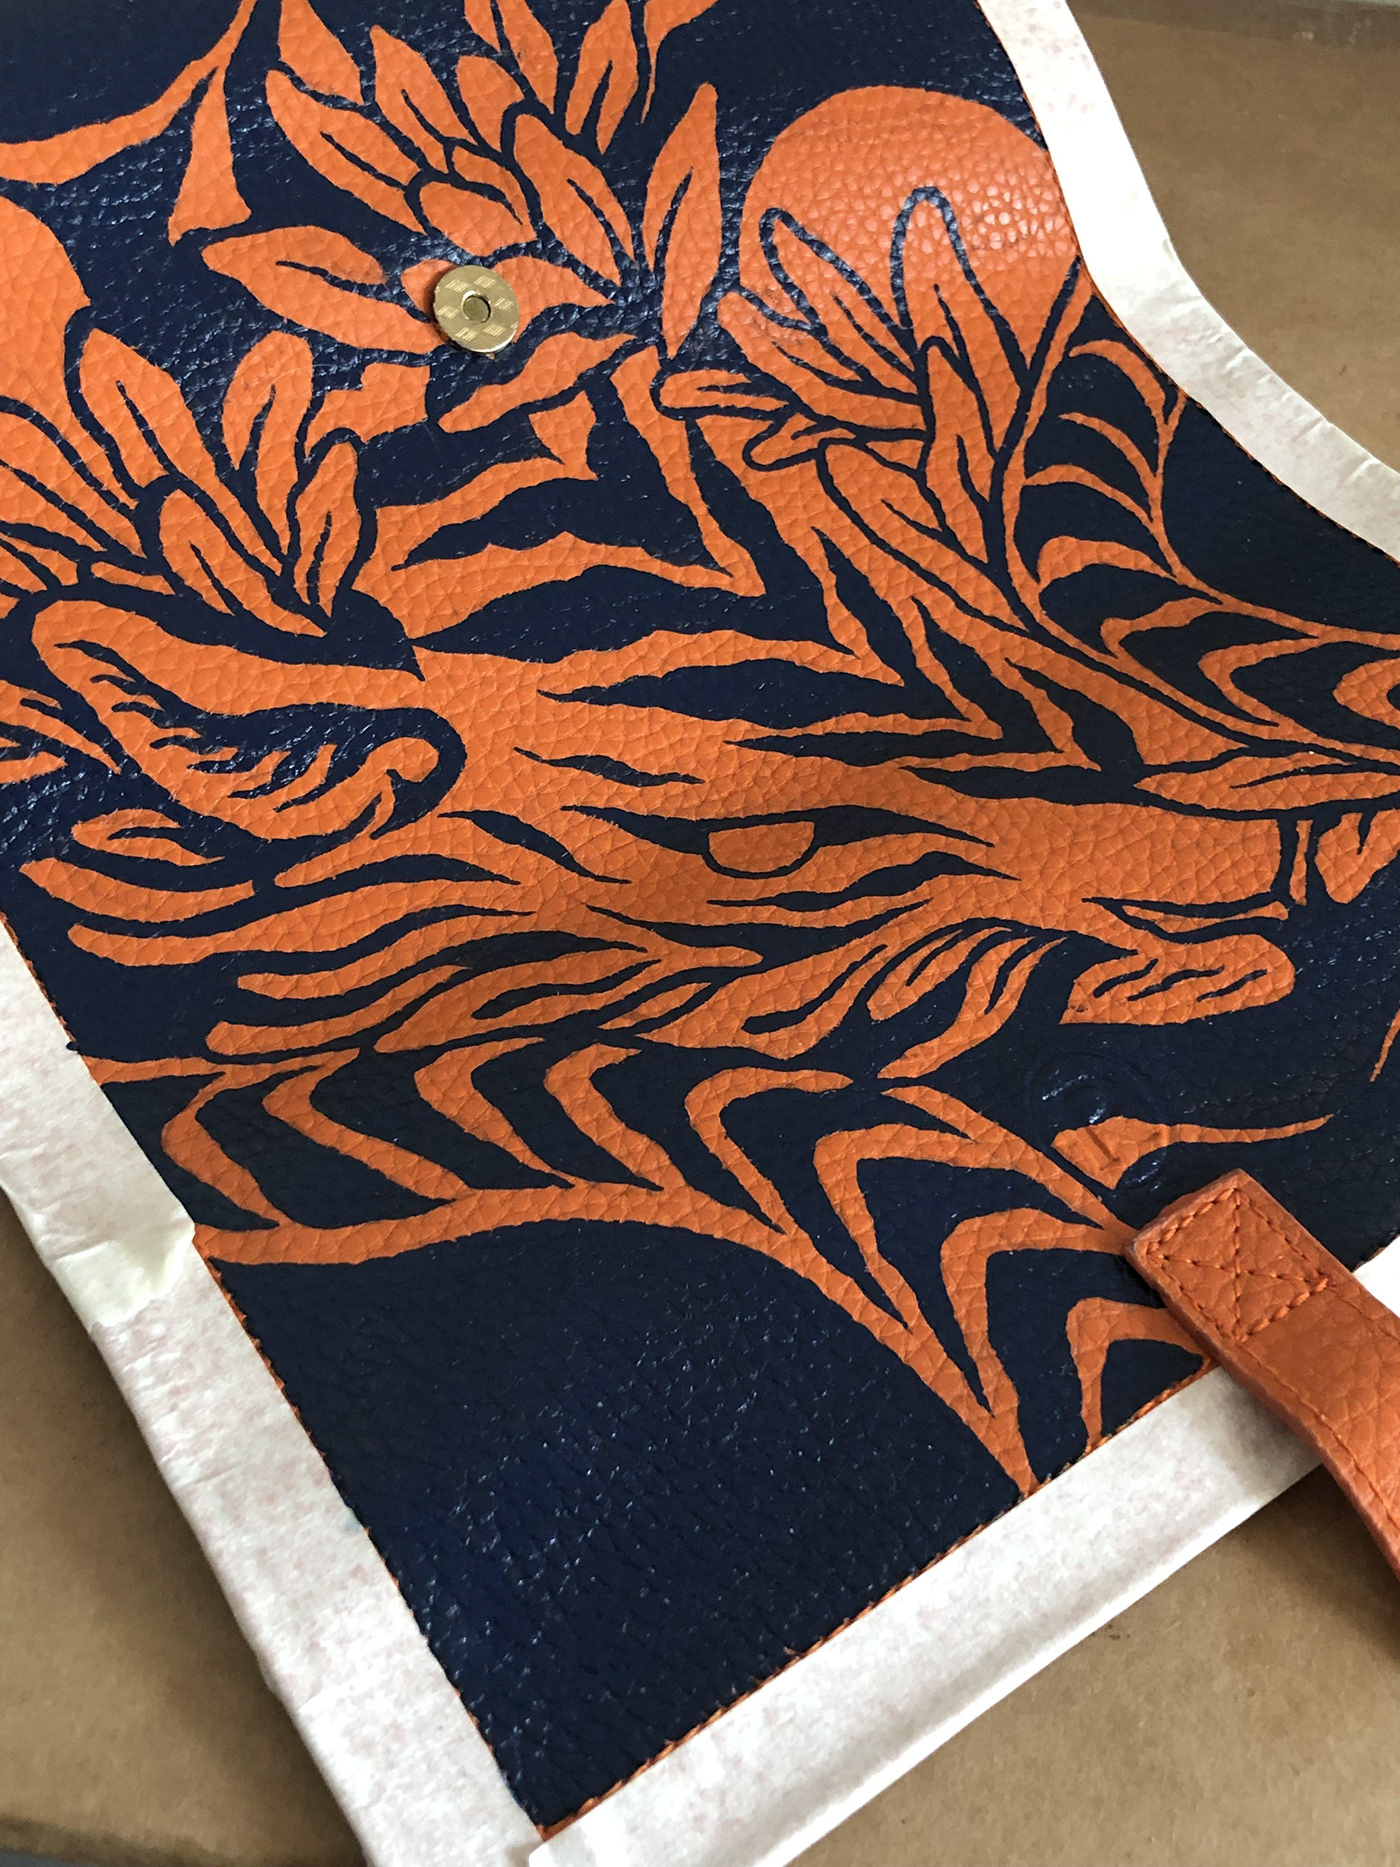 Bespoke artwork: Hand-painted leather product illustrating the 'Year of the Tiger', by Shann Larsson